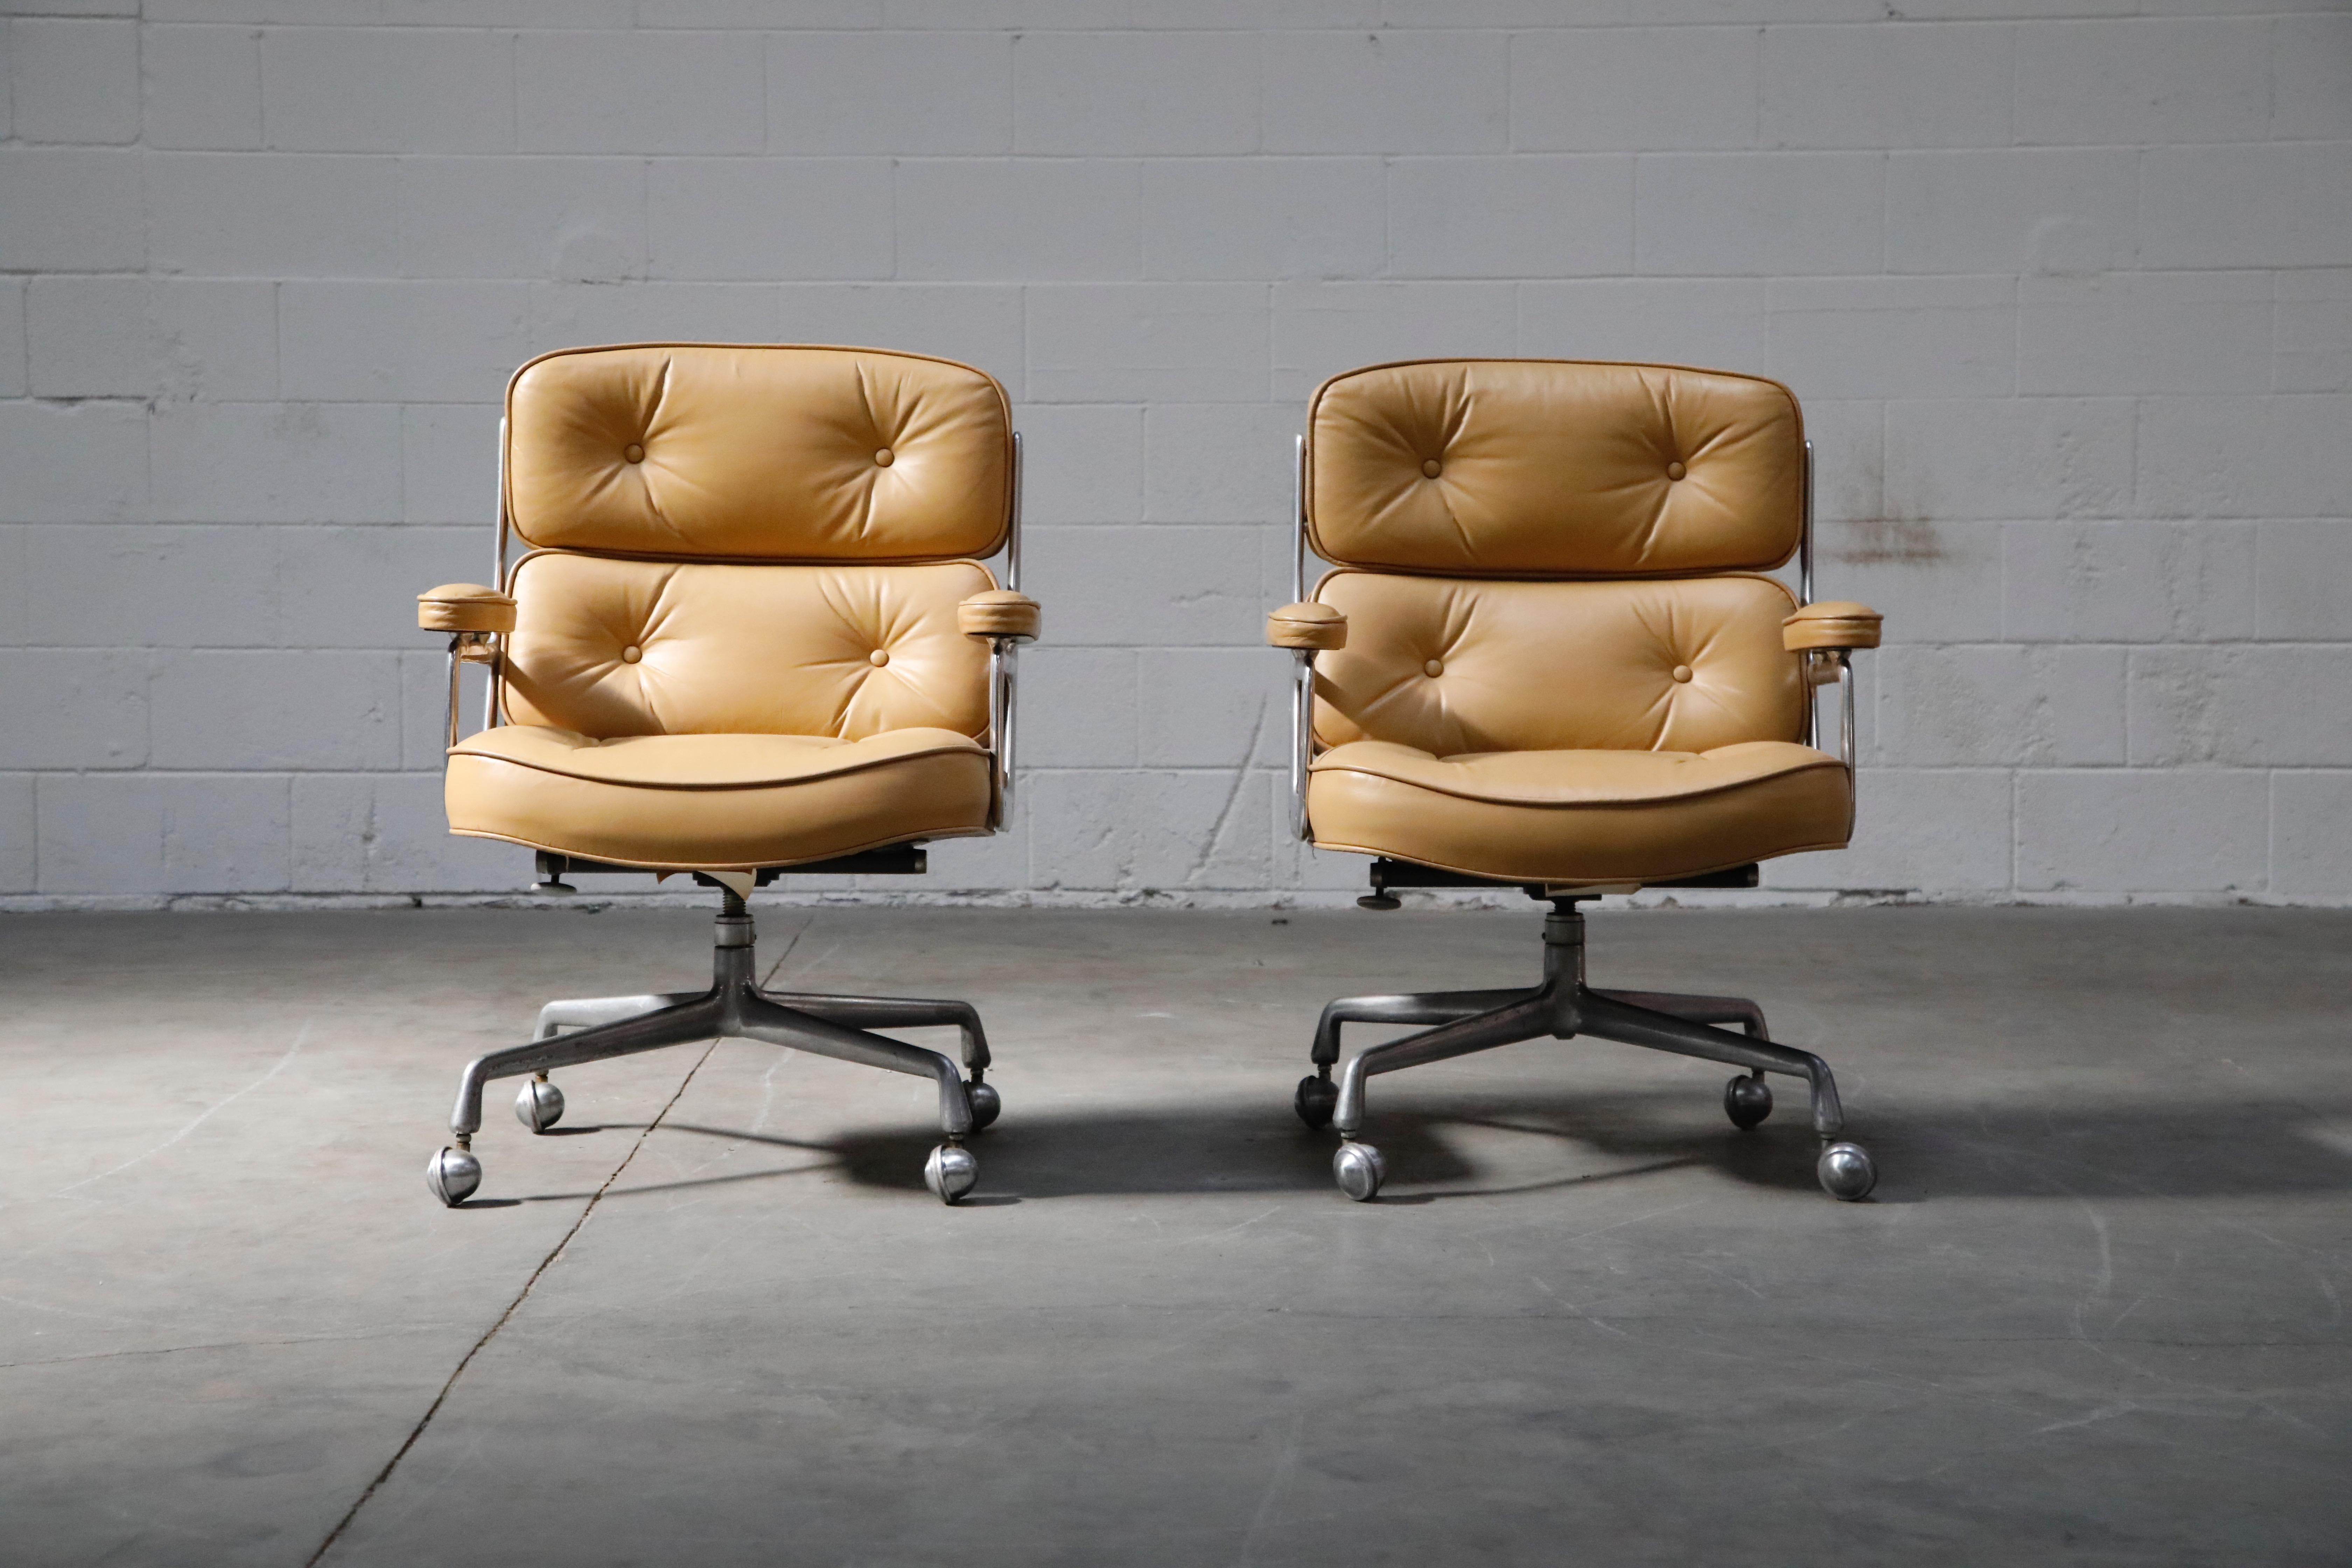 This wonderful 'Time Life' executive desk chair was designed by Charles Eames in 1959 and manufactured by Herman Miller. This chair features its original tan colored leather over aluminum frames with tilt function, casters and height